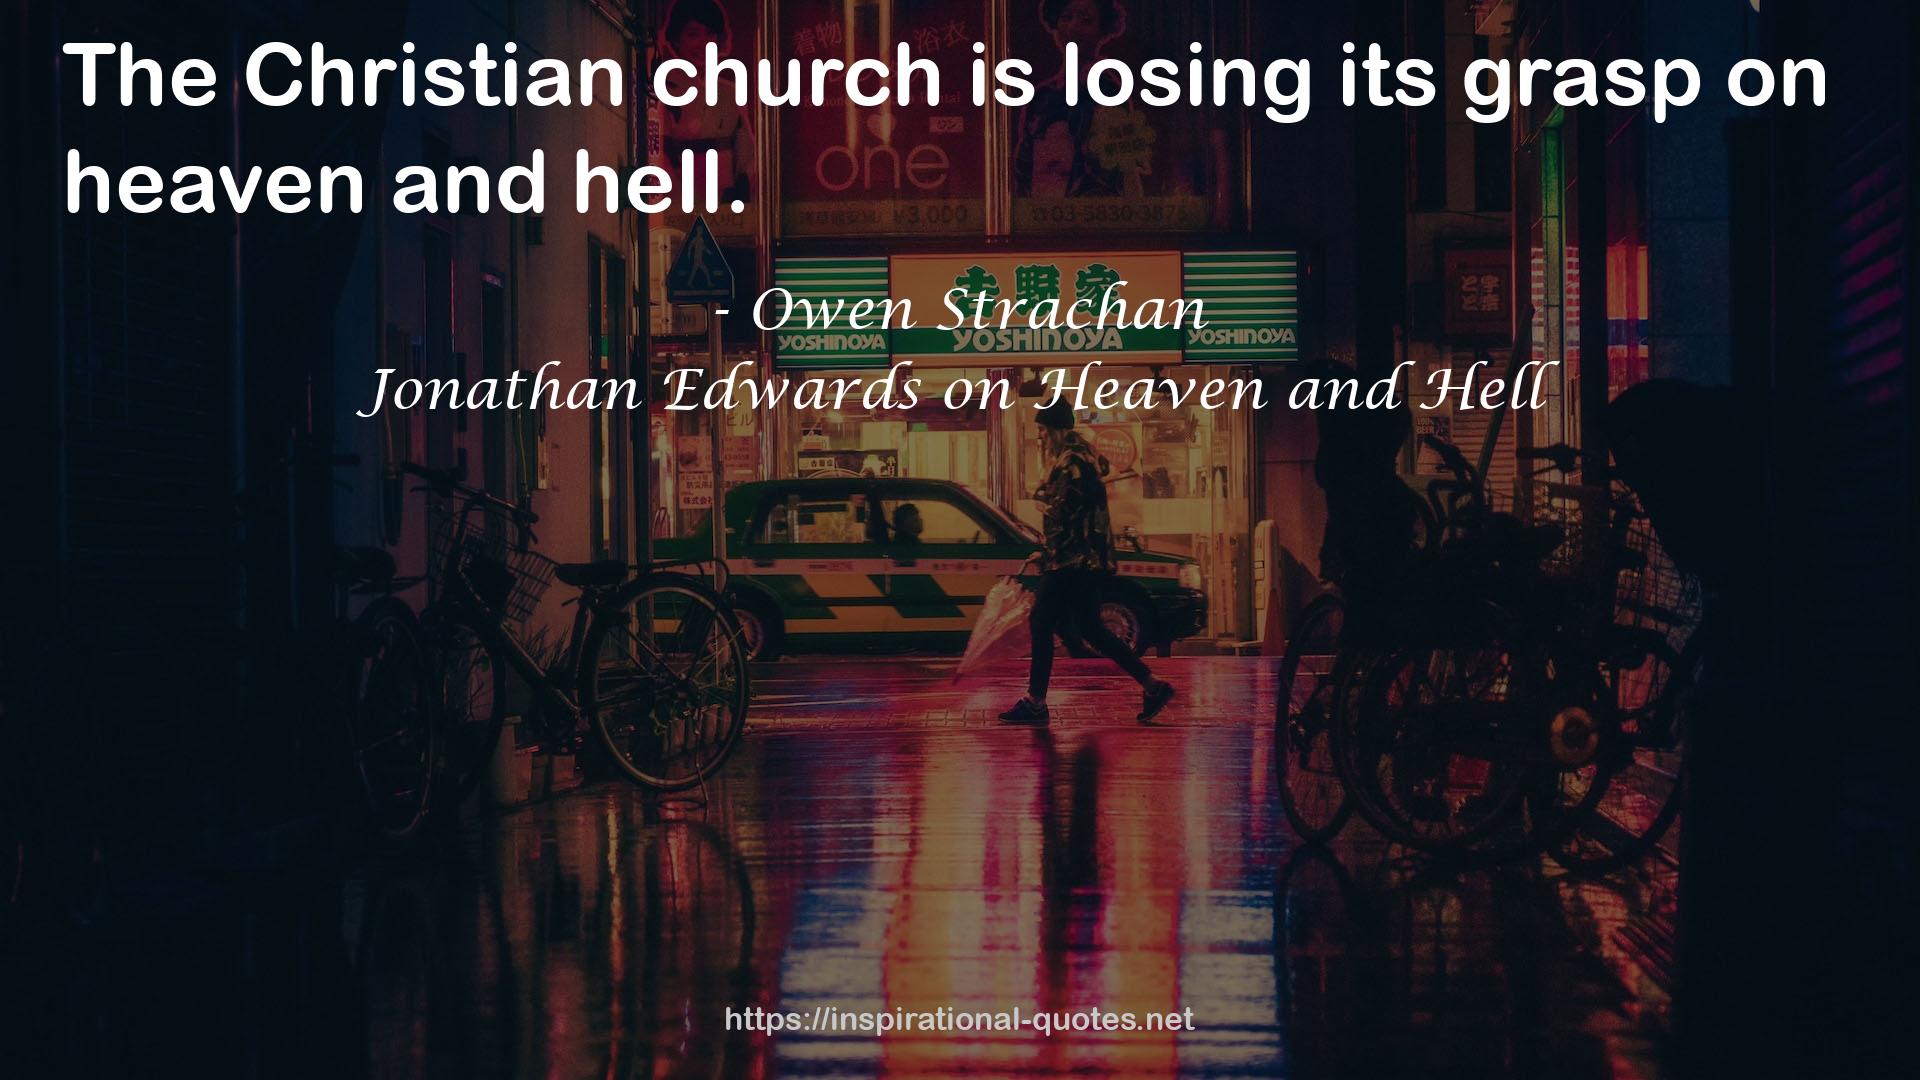 Jonathan Edwards on Heaven and Hell QUOTES